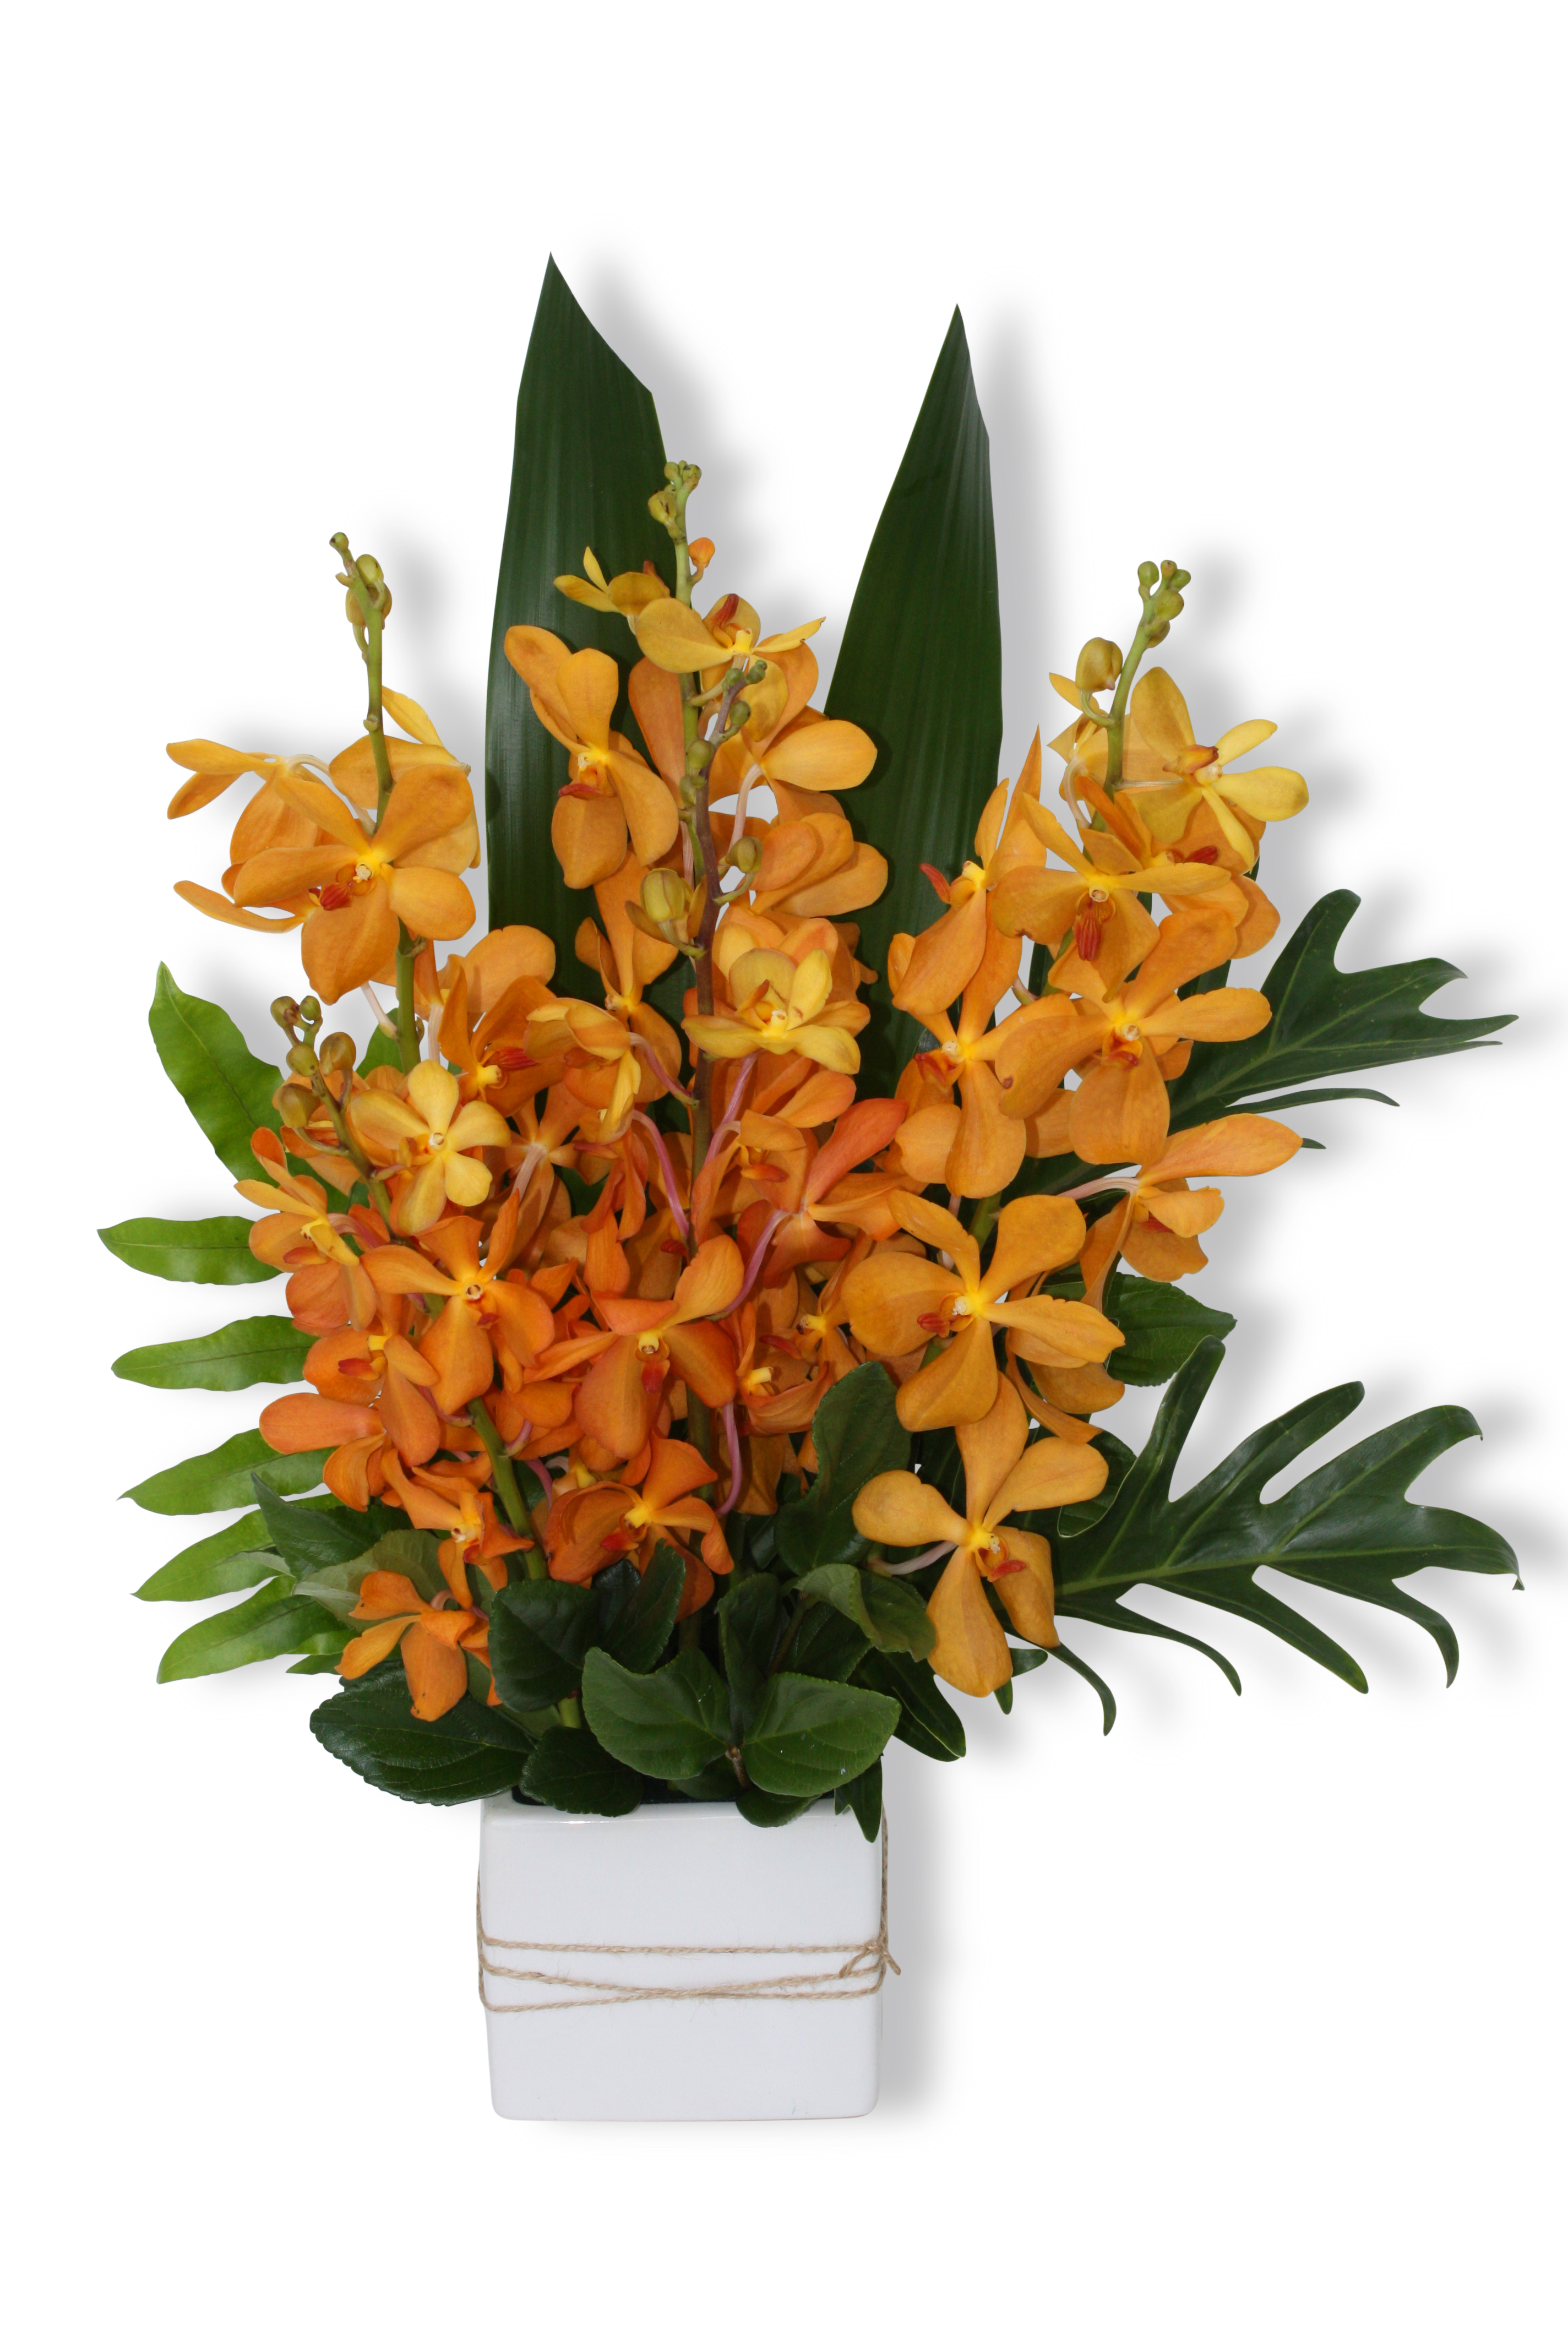 Joondalup Health Campus Services Provided - Joondalup Florist